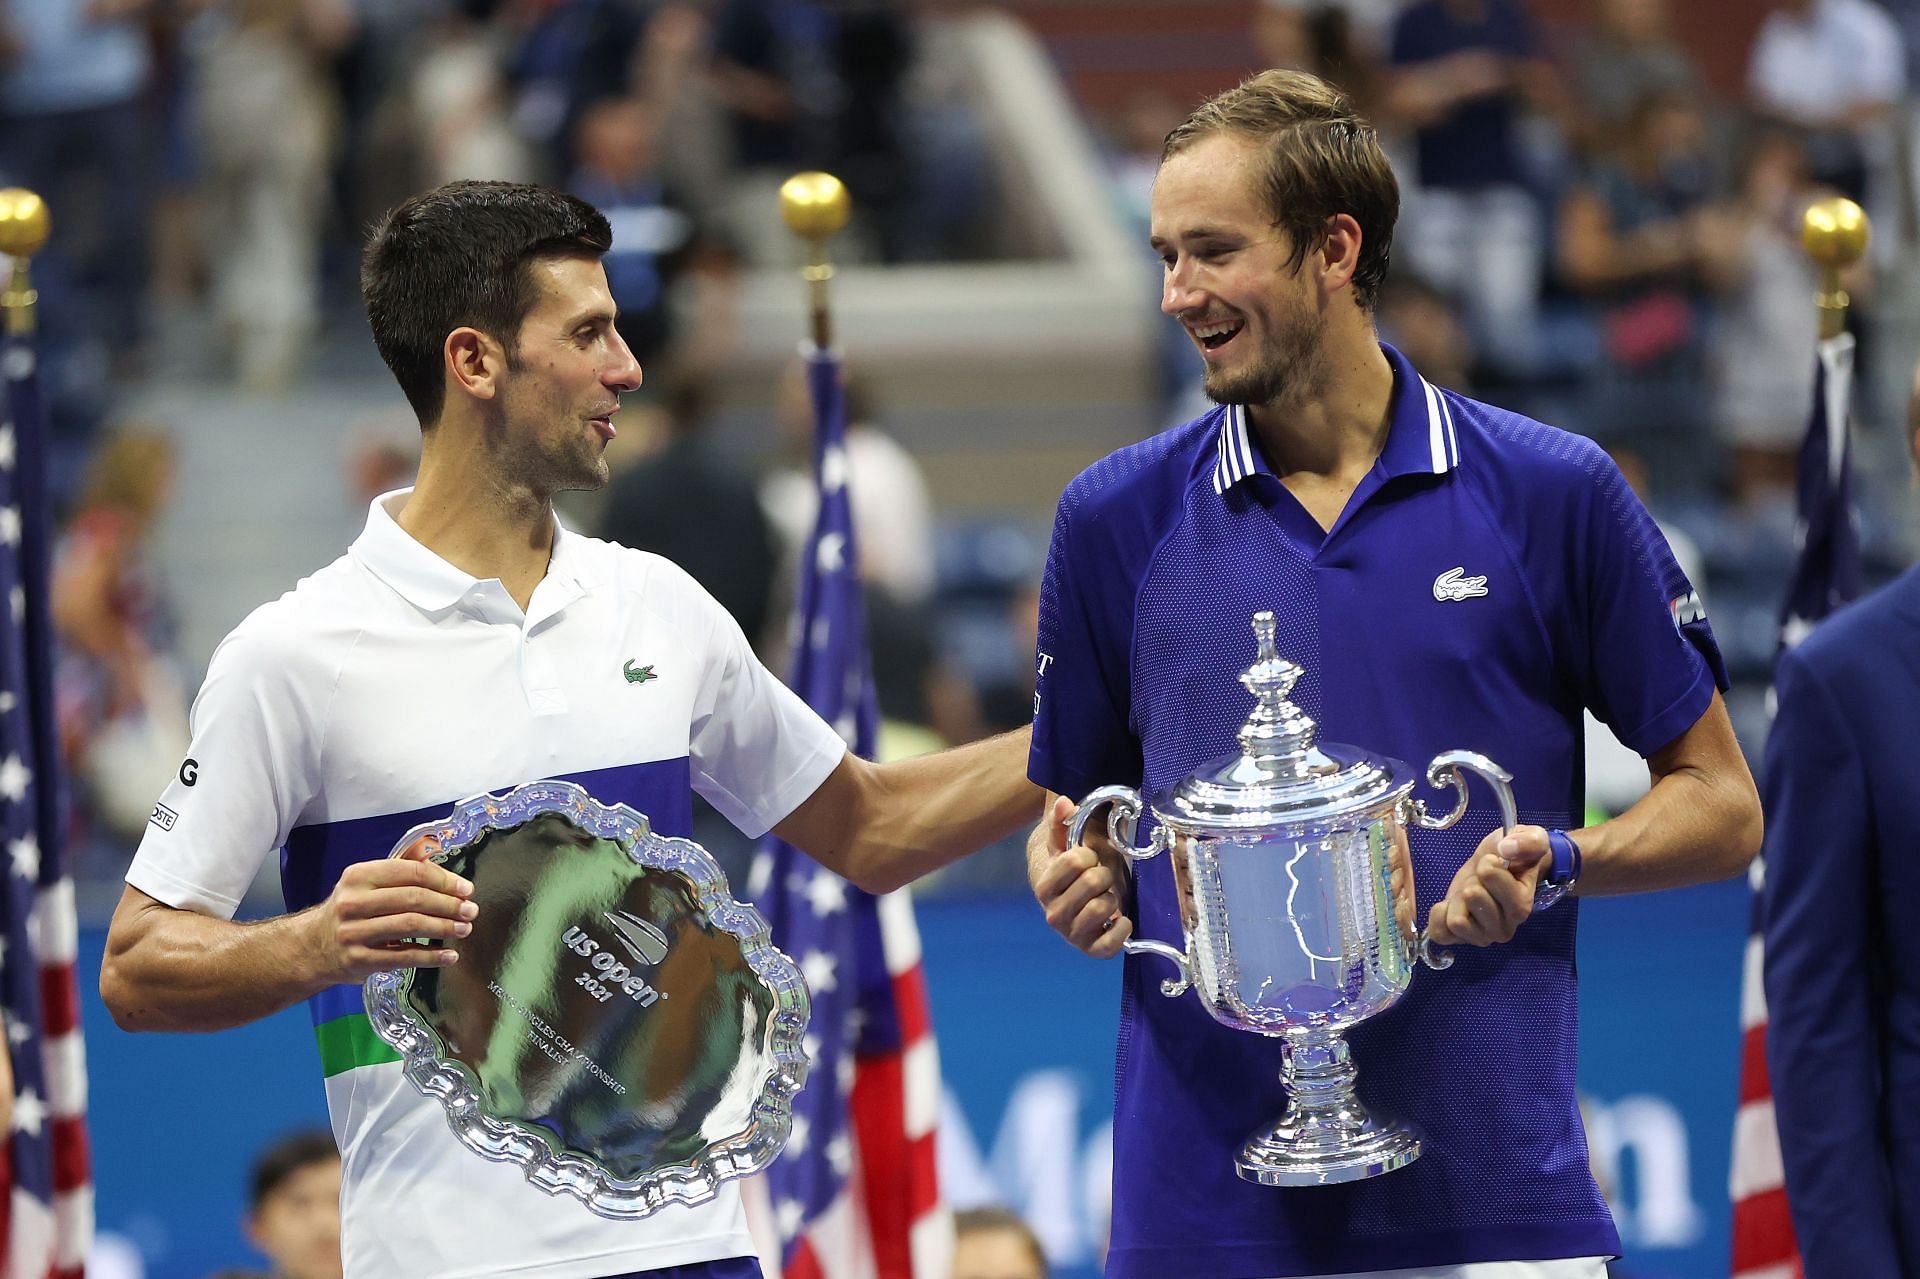 Novak Djokovic and Daniil Medvedev with their respective 2021 US Open trophies